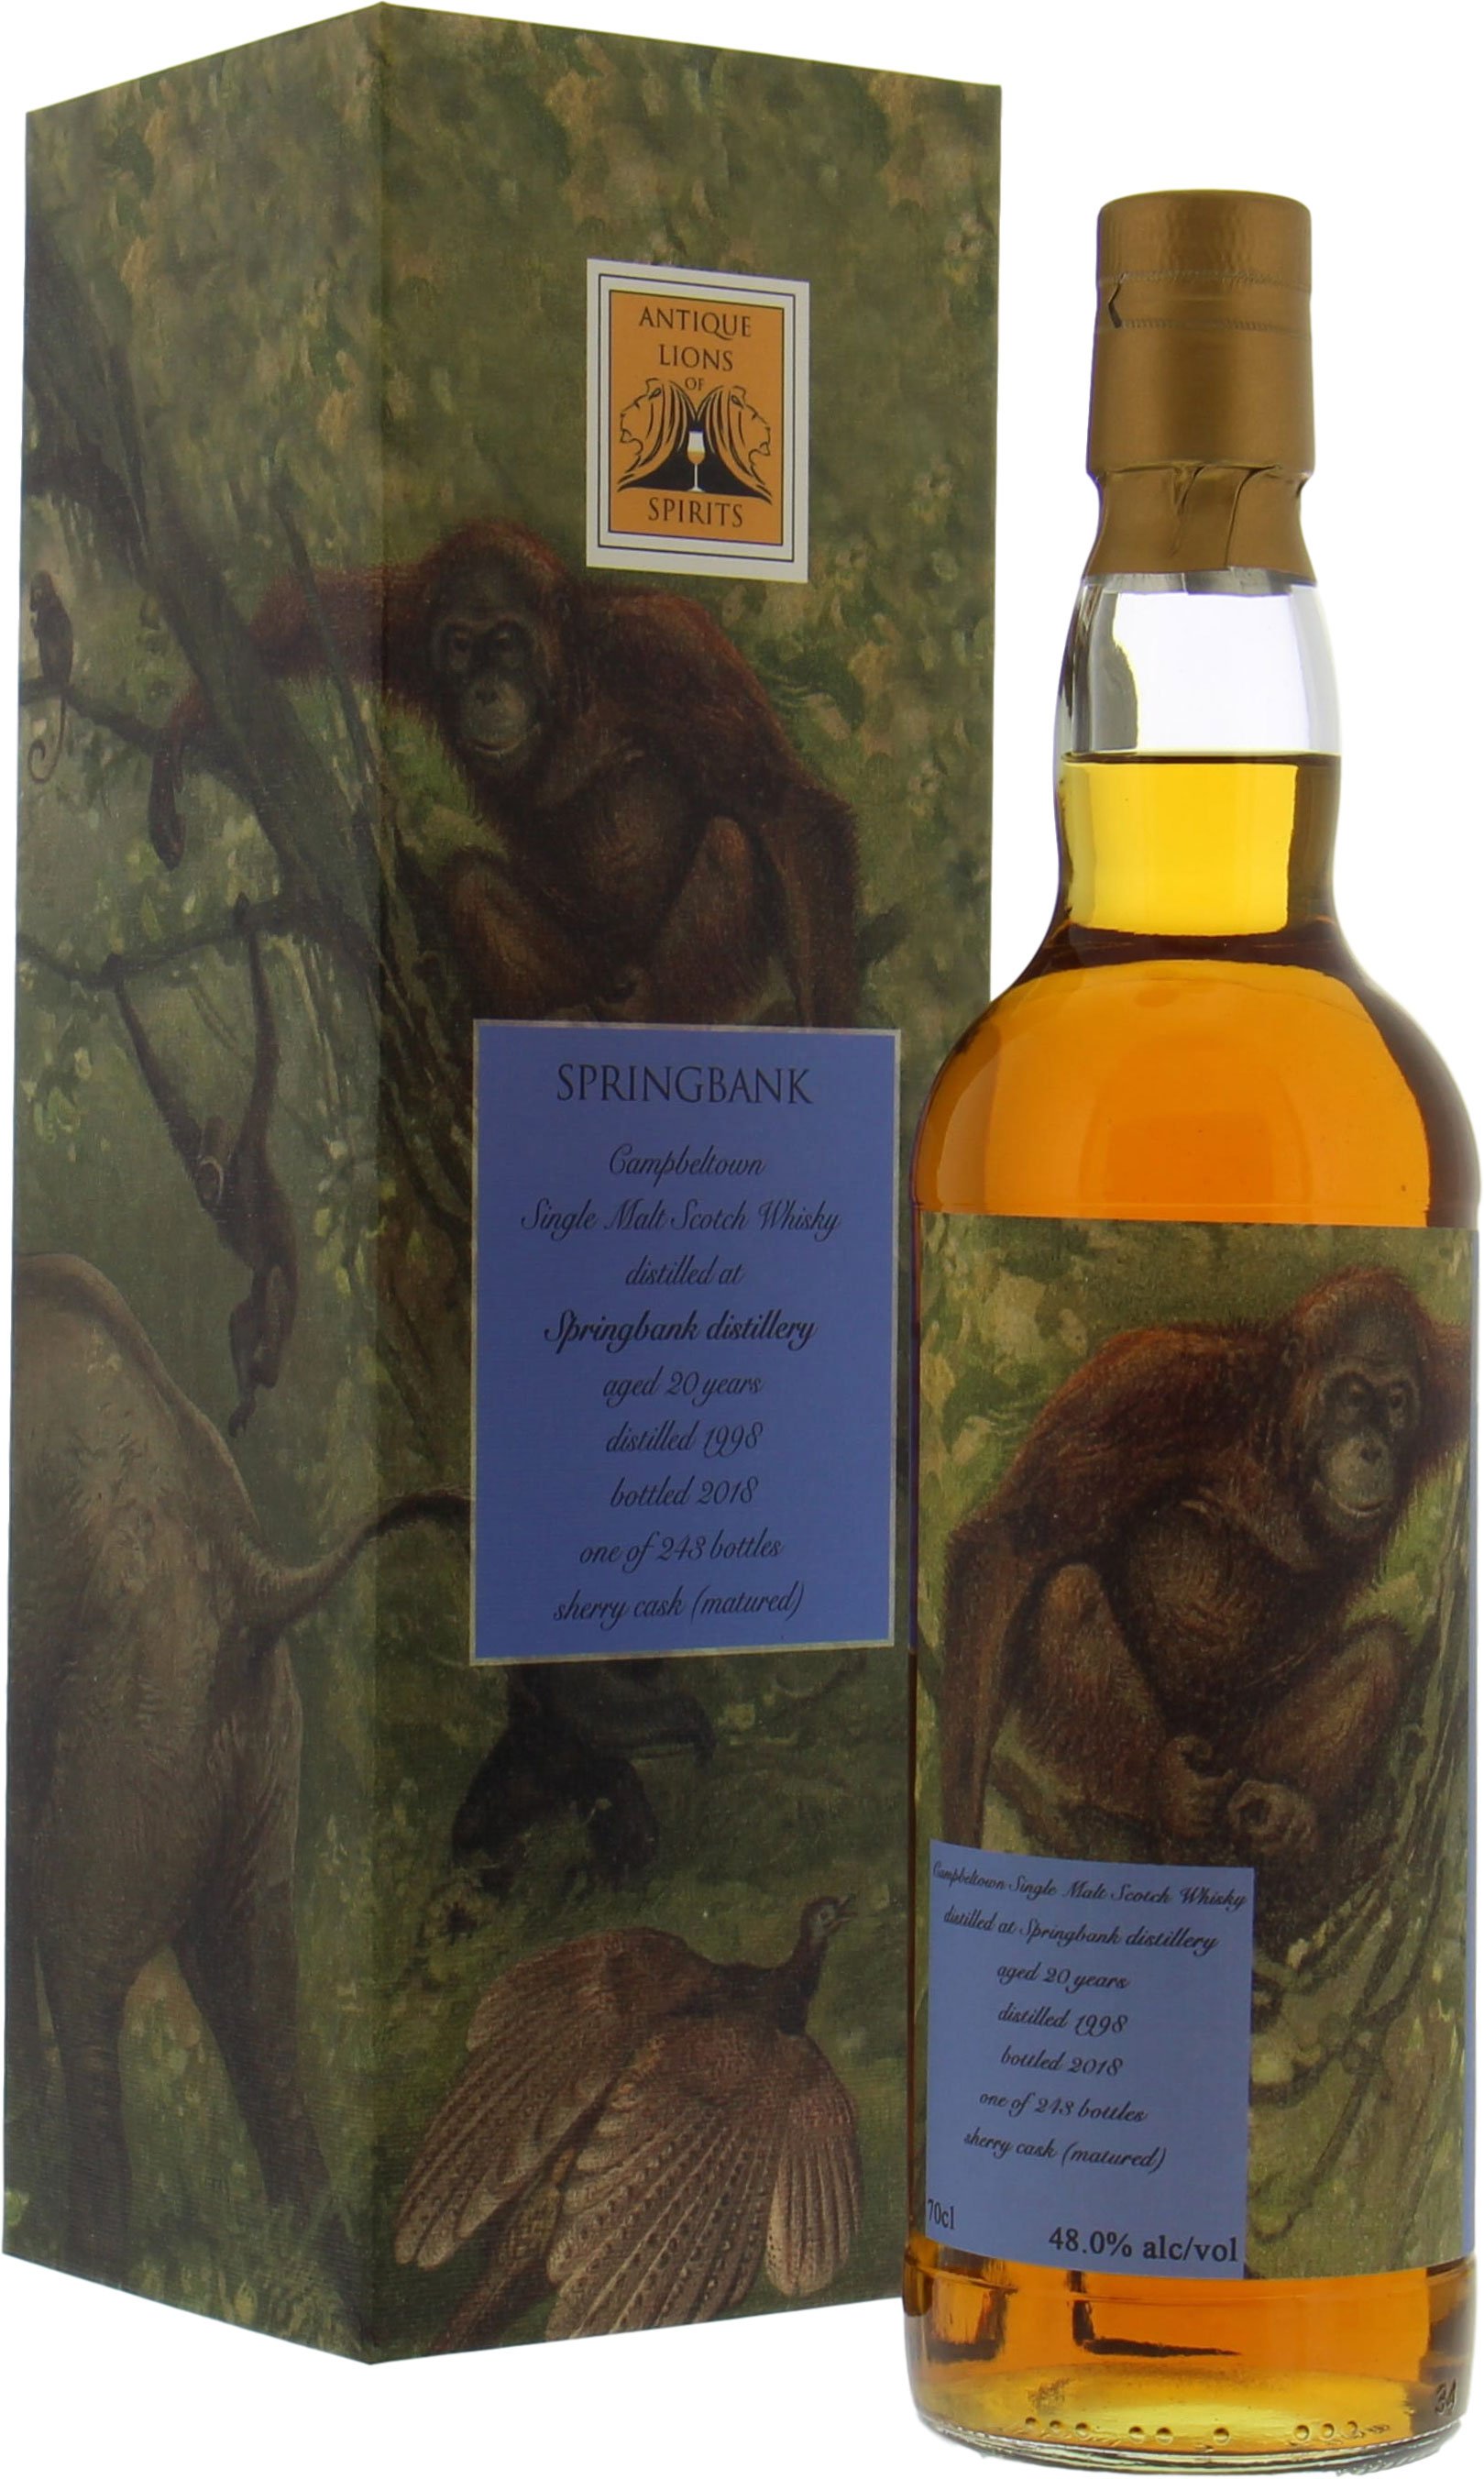 Springbank - 20 Years Old Antique Lions of Spirits Savannah Series 48% 1998 IN OC